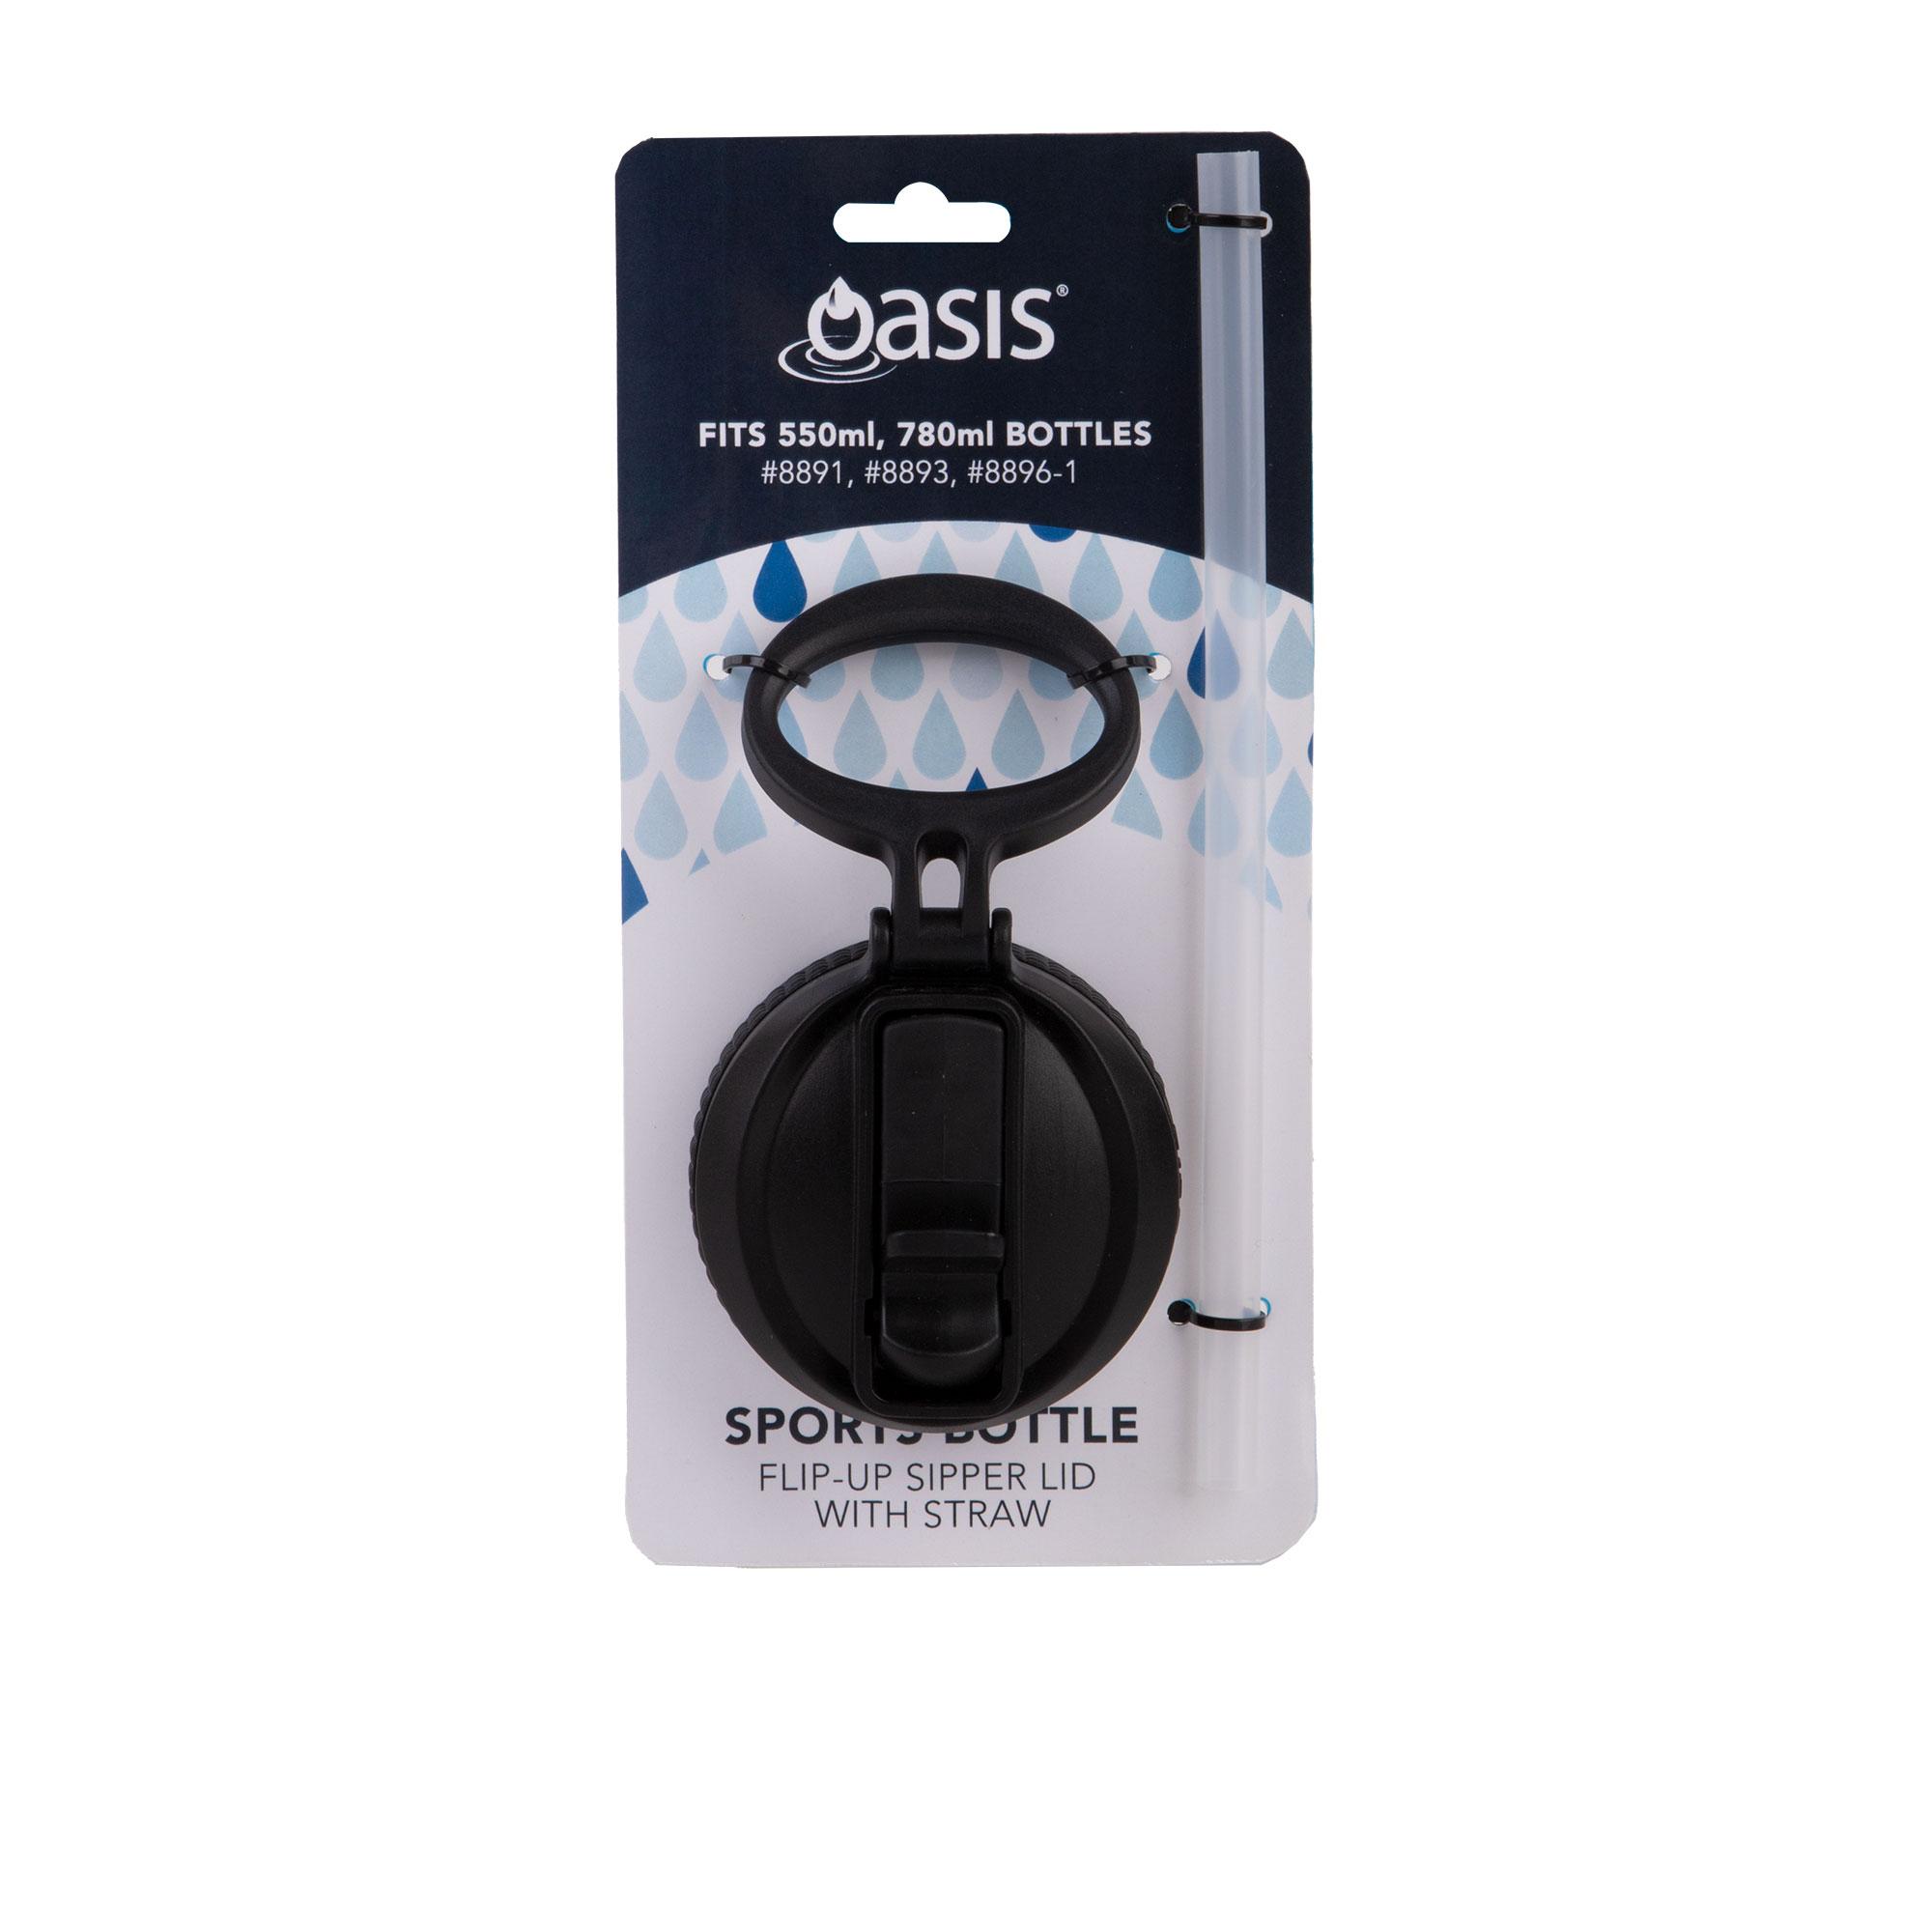 Oasis Challenger Sipper Ports Bottle Lid and 1 Straw Carded Black Image 2